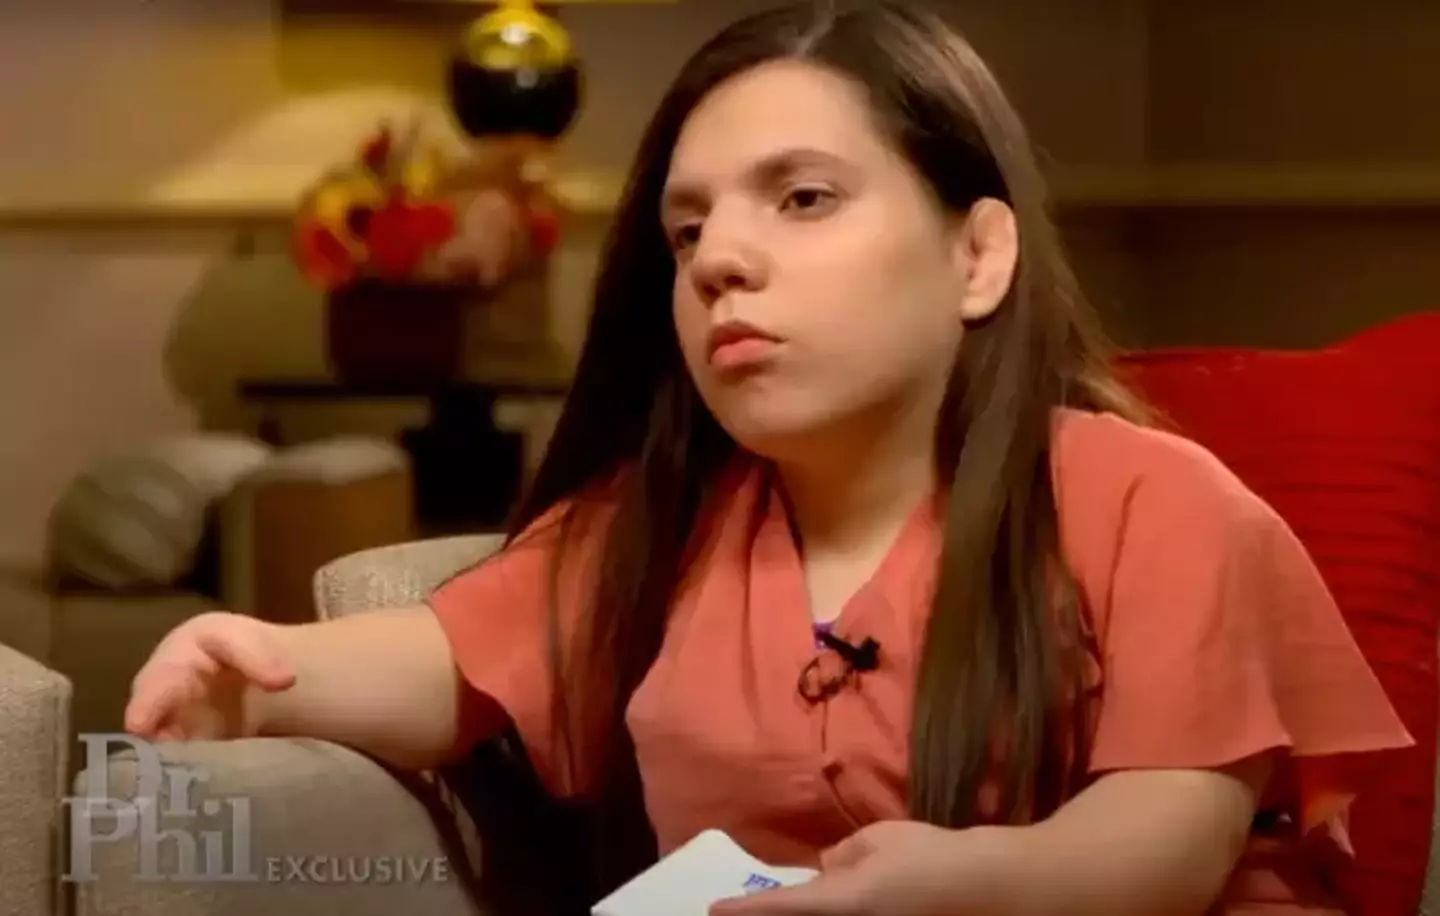 Natalia confidently denied all of the allegations made against her while on Dr. Phil.